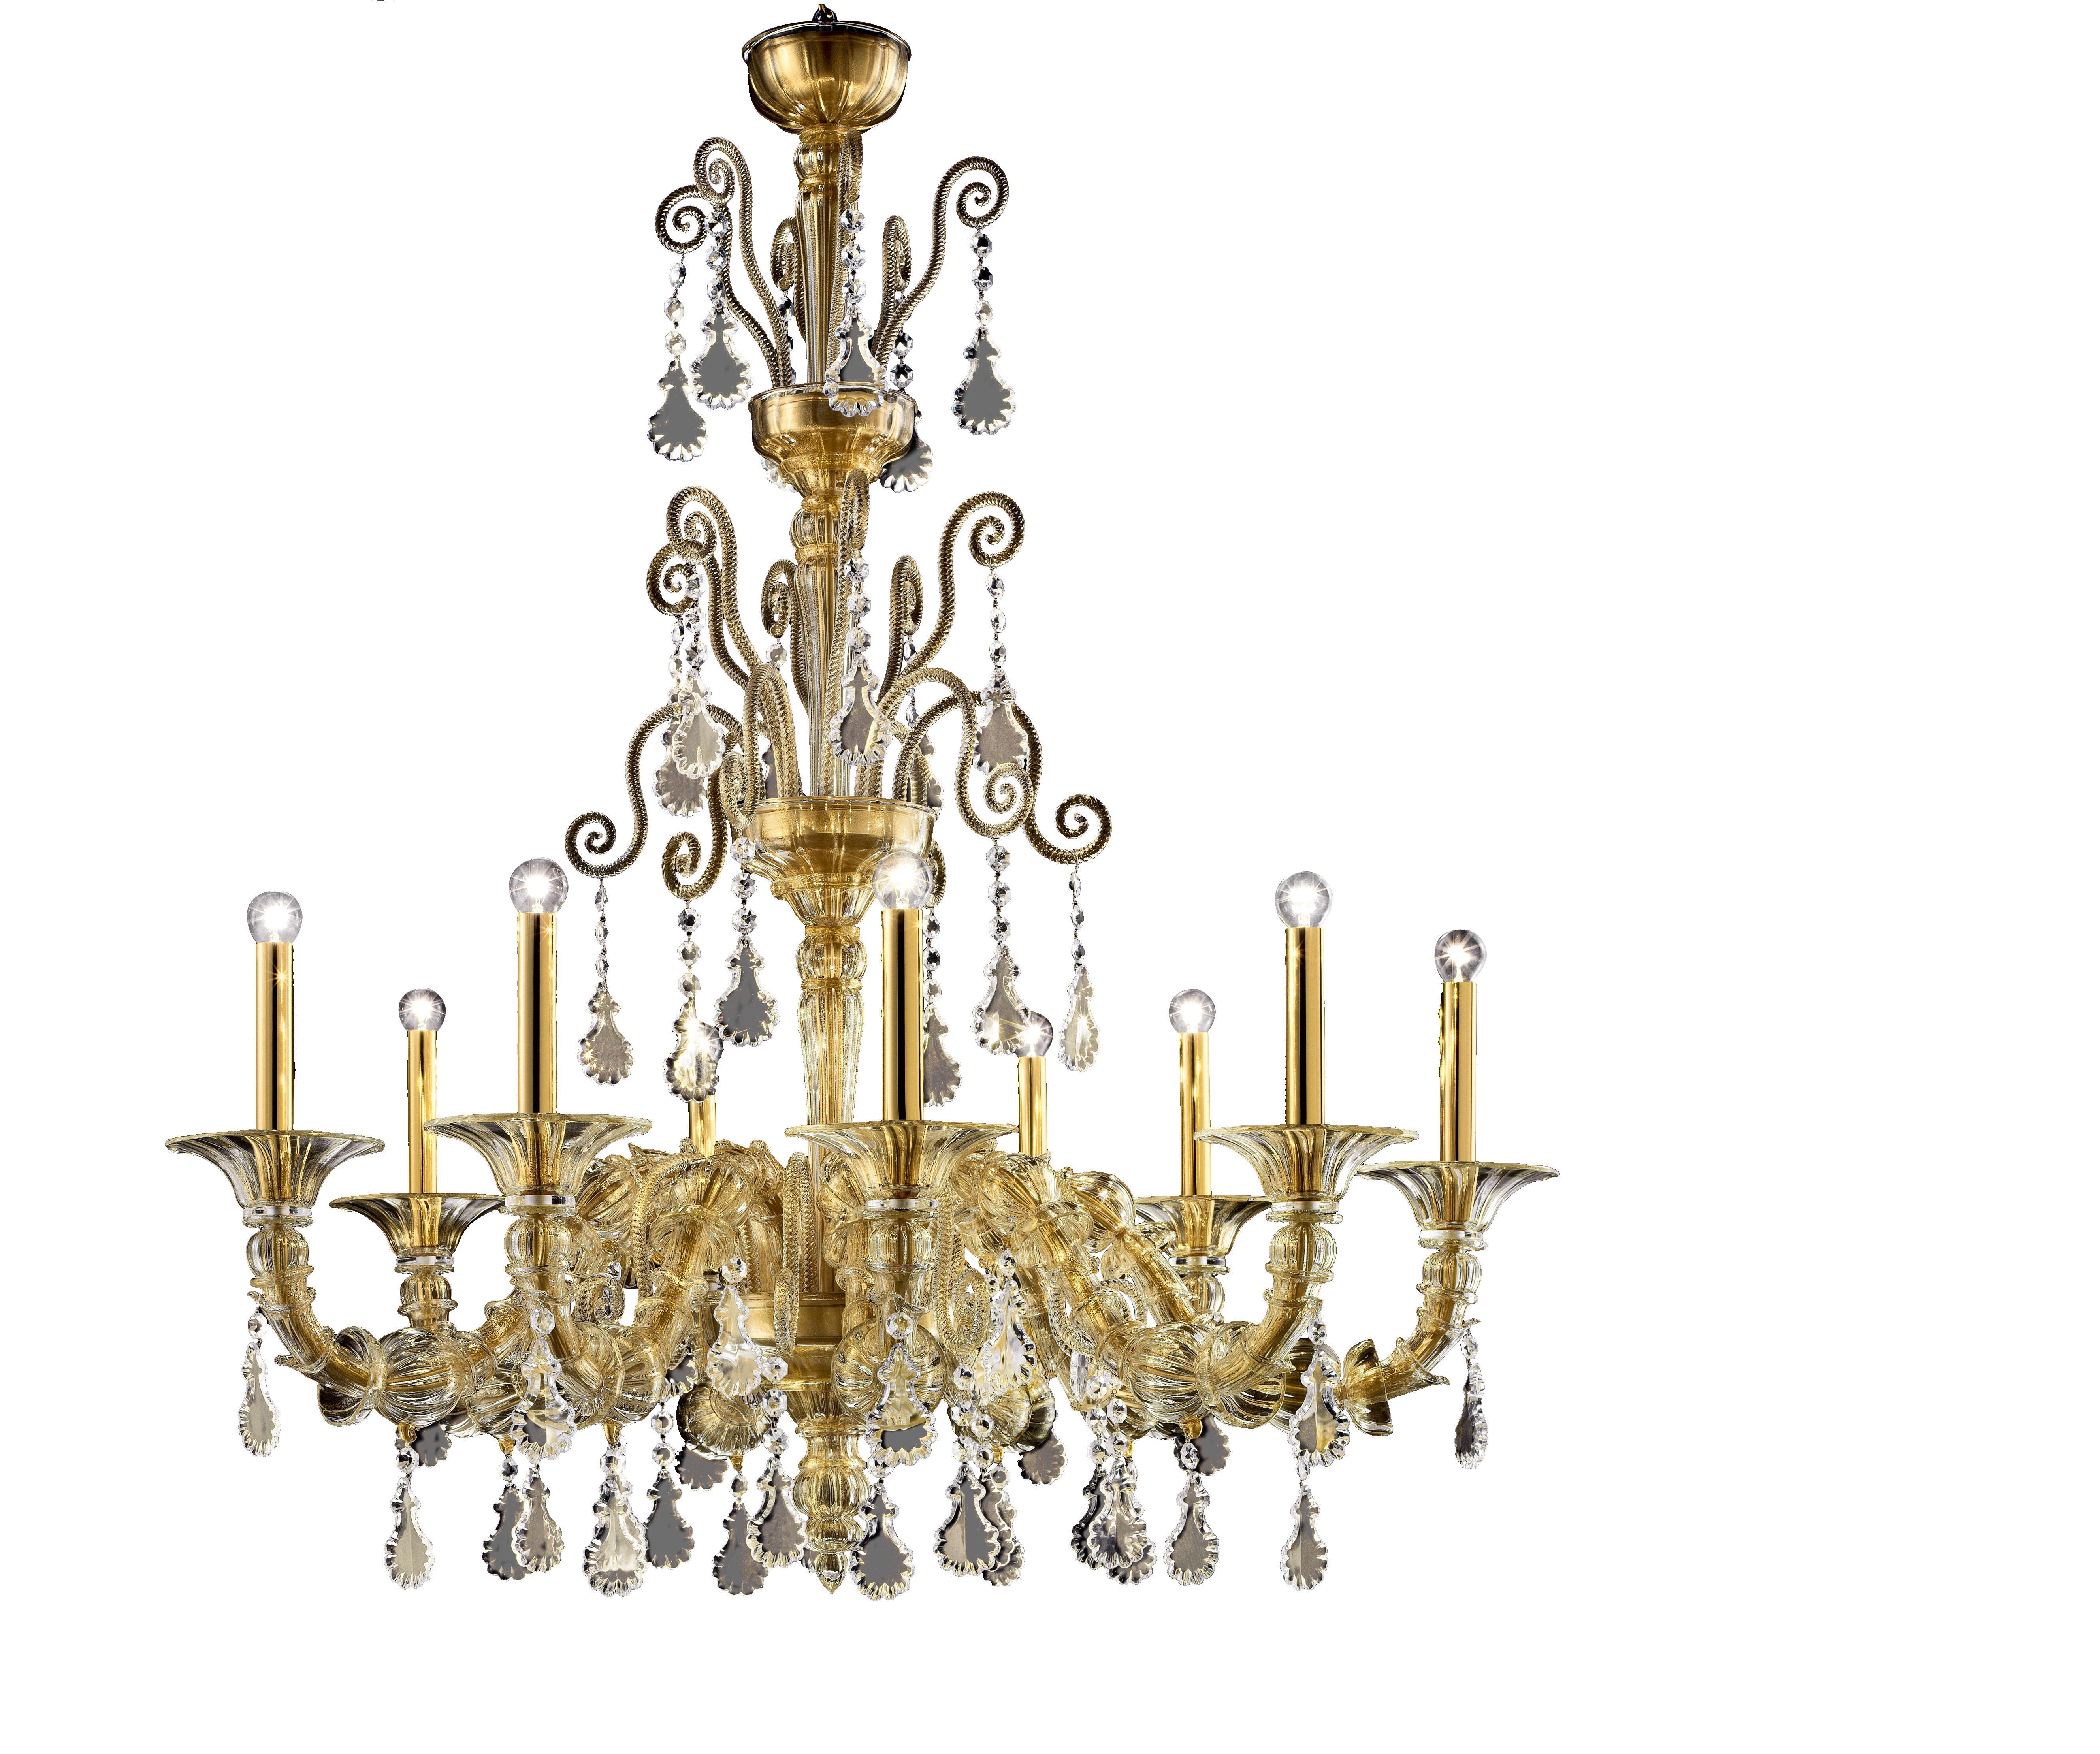 Baikal 5560 09 Chandelier in Glass, by Barovier&Toso